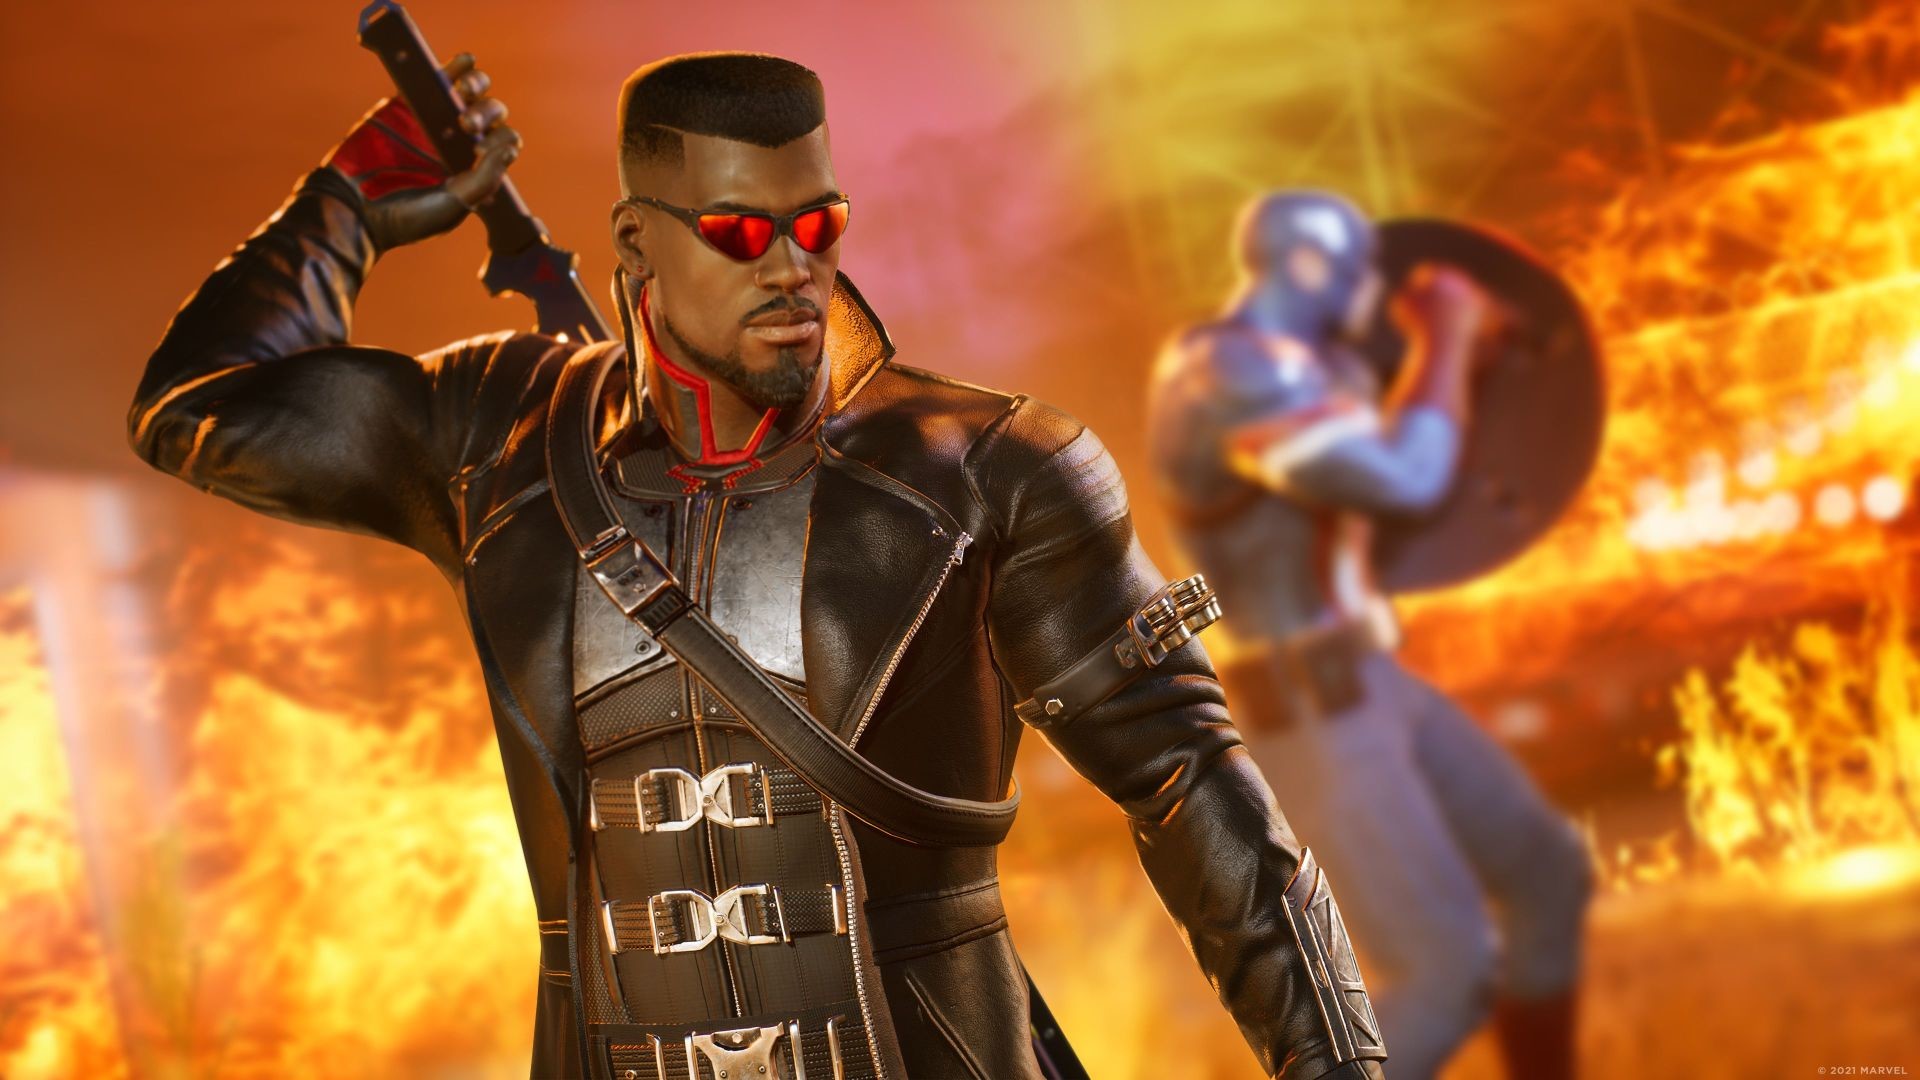 How to Fix: Marvel's Midnight Suns Keeps Crashing on Startup on PC